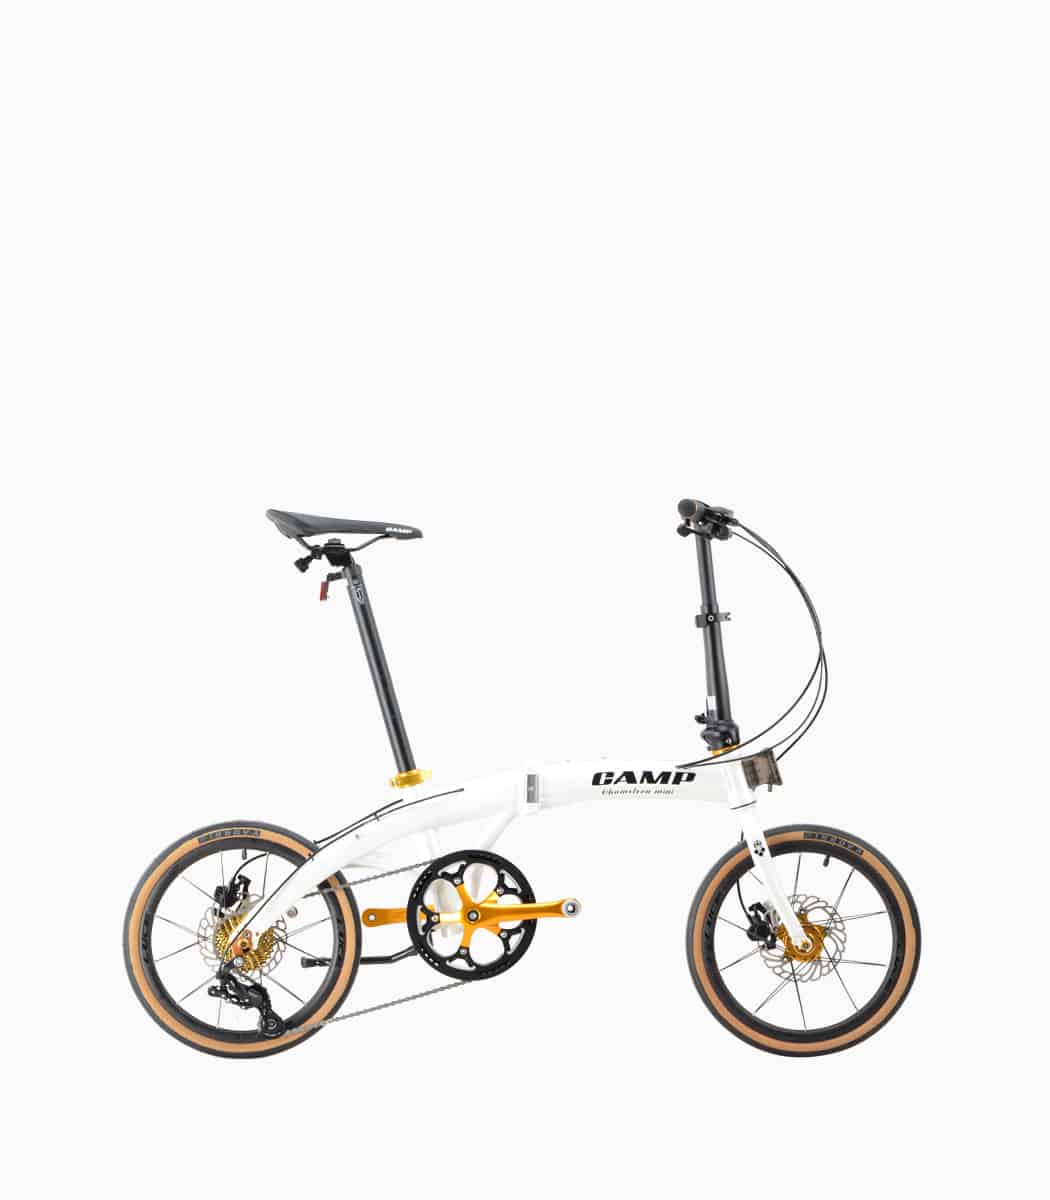 CAMP CHAMELEON Mini (PEARL WHITE) foldable bicycle right